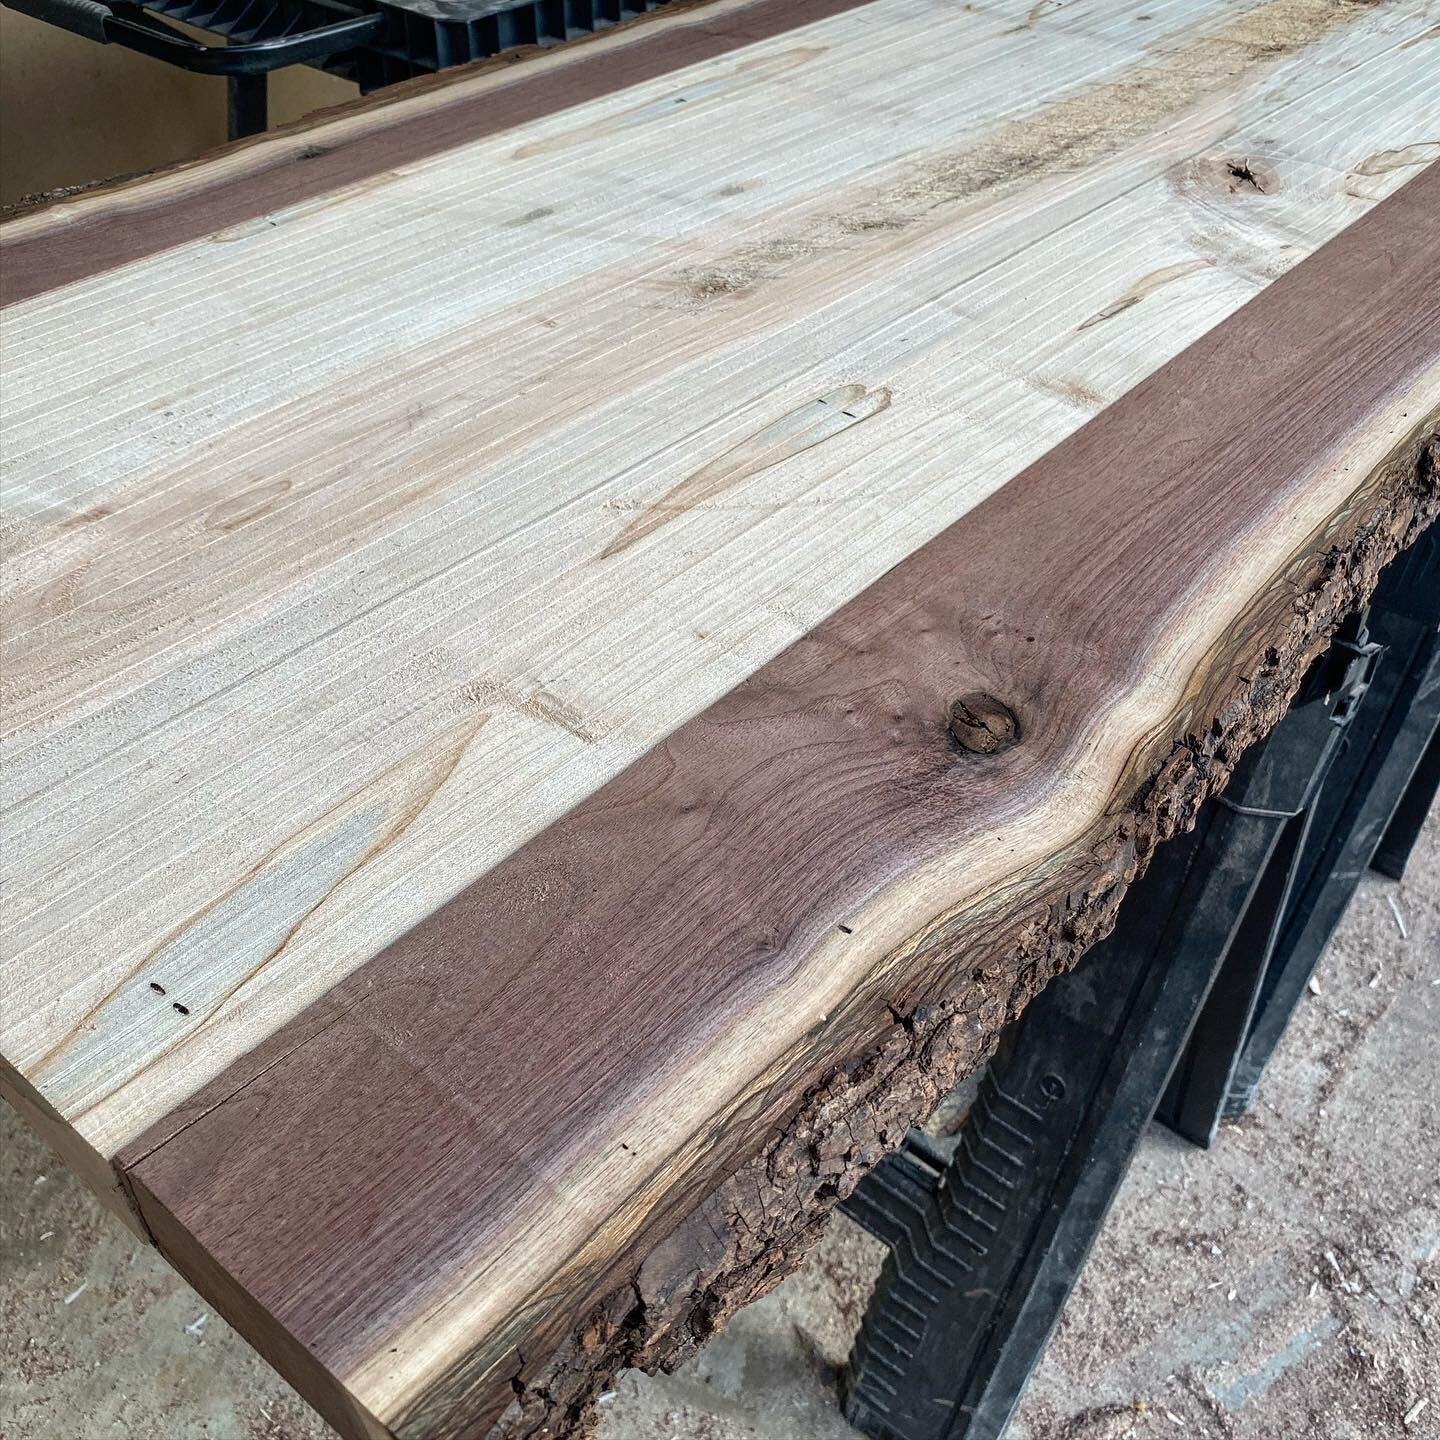 Getting creative over here! Client designed ambrosia maple desk with black walnut edges. 
.
.
.
#woodworking #woodendesk #woodfurniture #baltimore #interiordesigner #homeoffice